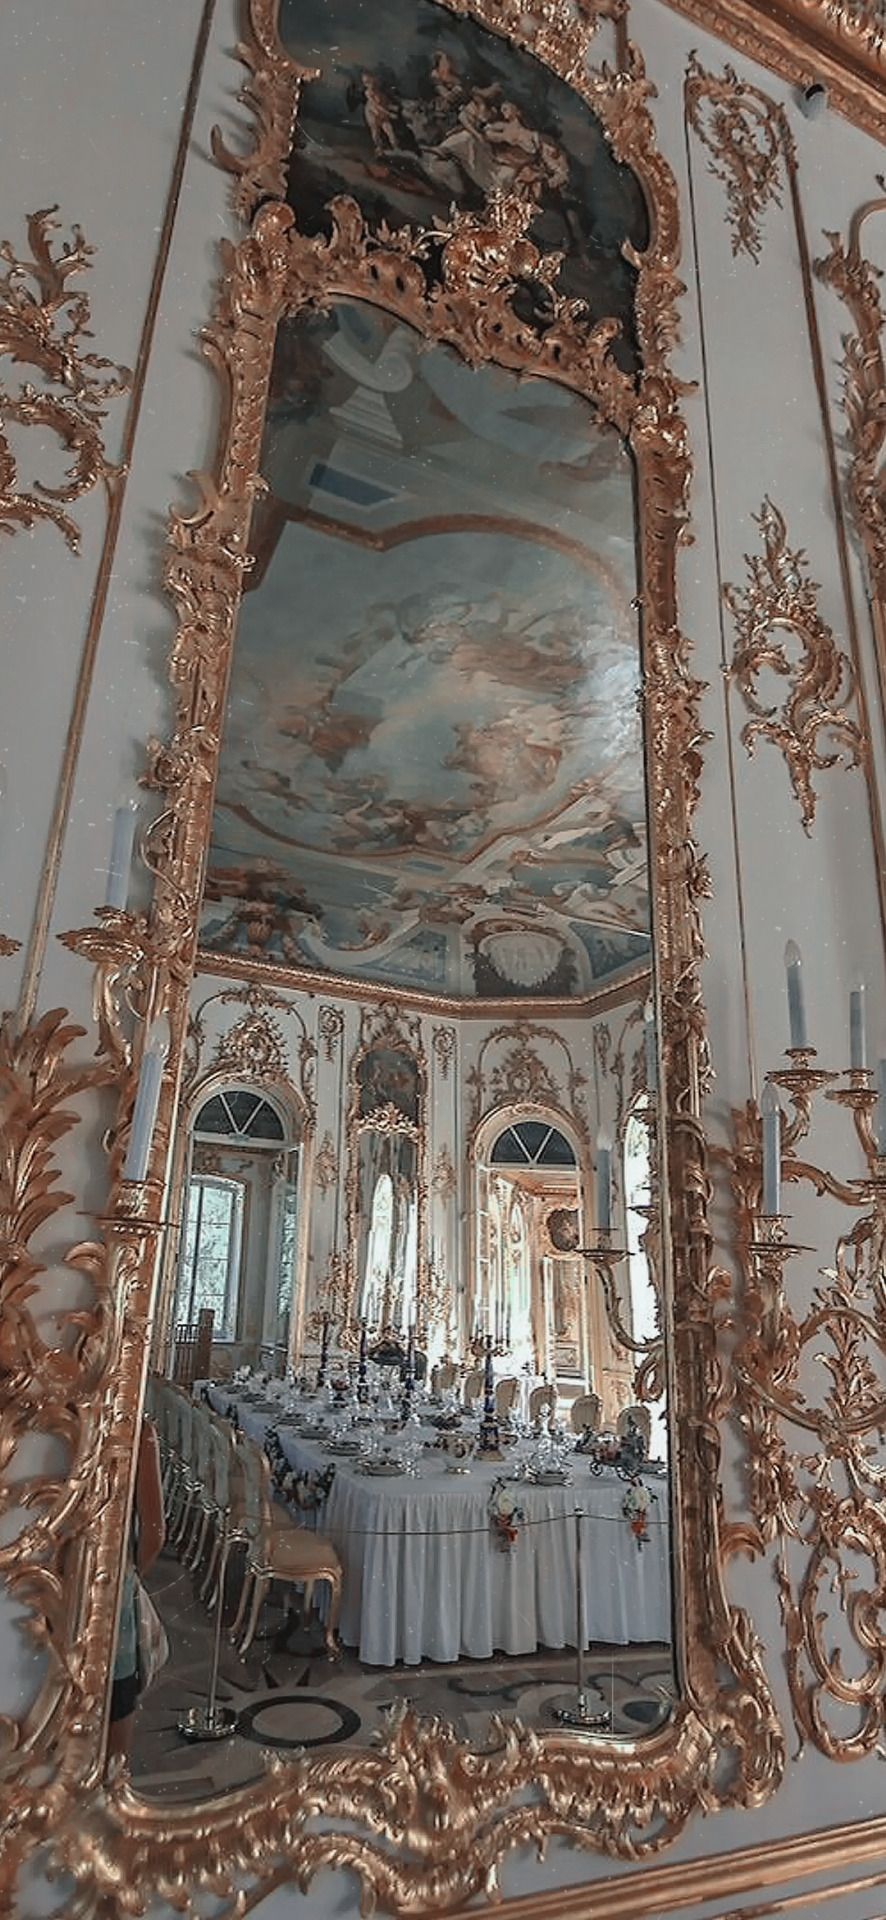 A fancy room with mirrors and chandeliers - Royalcore